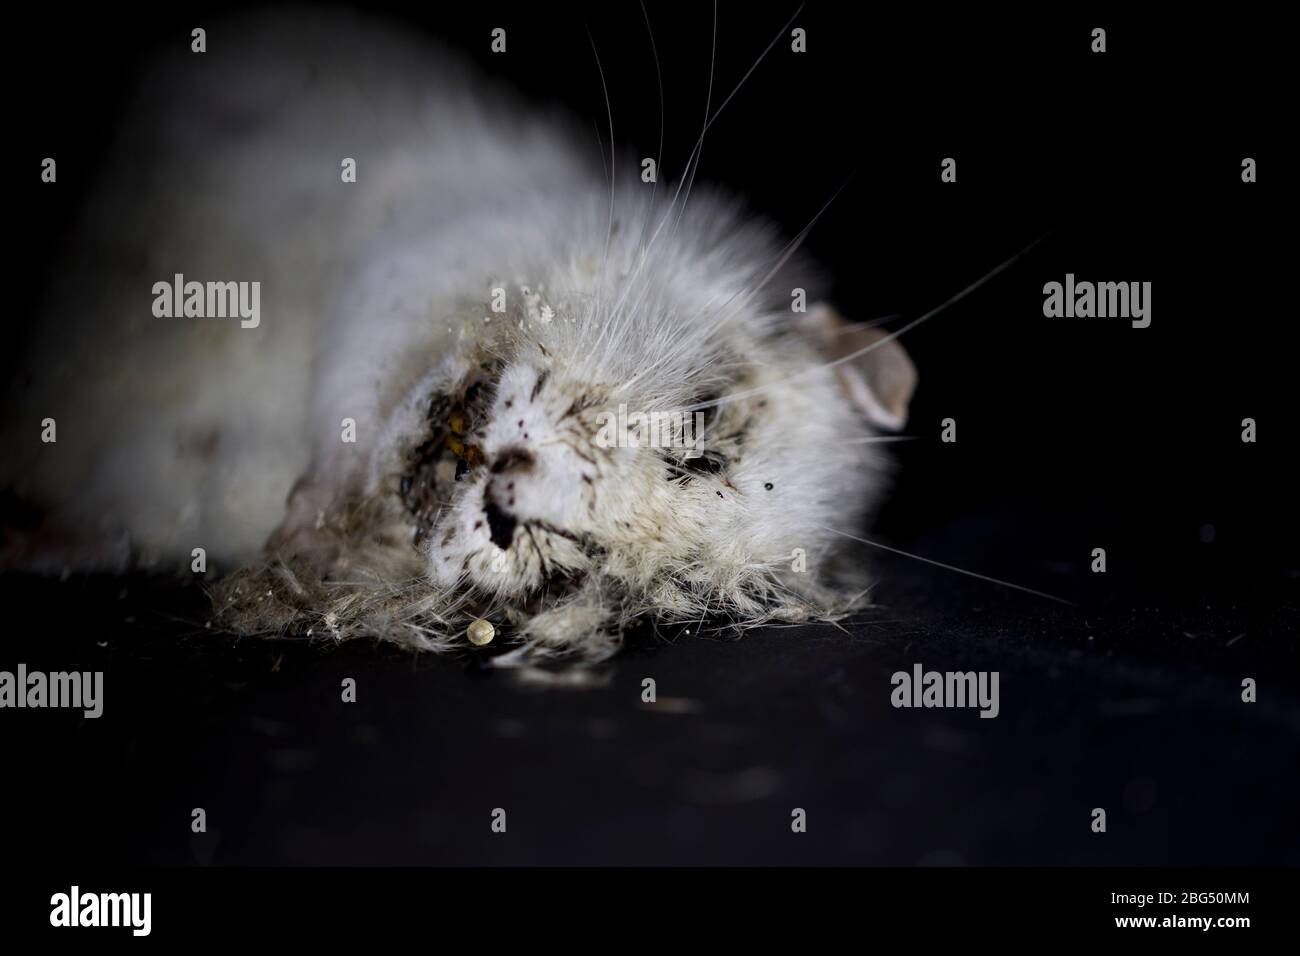 Death macro view. Dead white rat close up animal decomposition active decay stage. White rat with maggots and flies feeding off it. Stock Photo